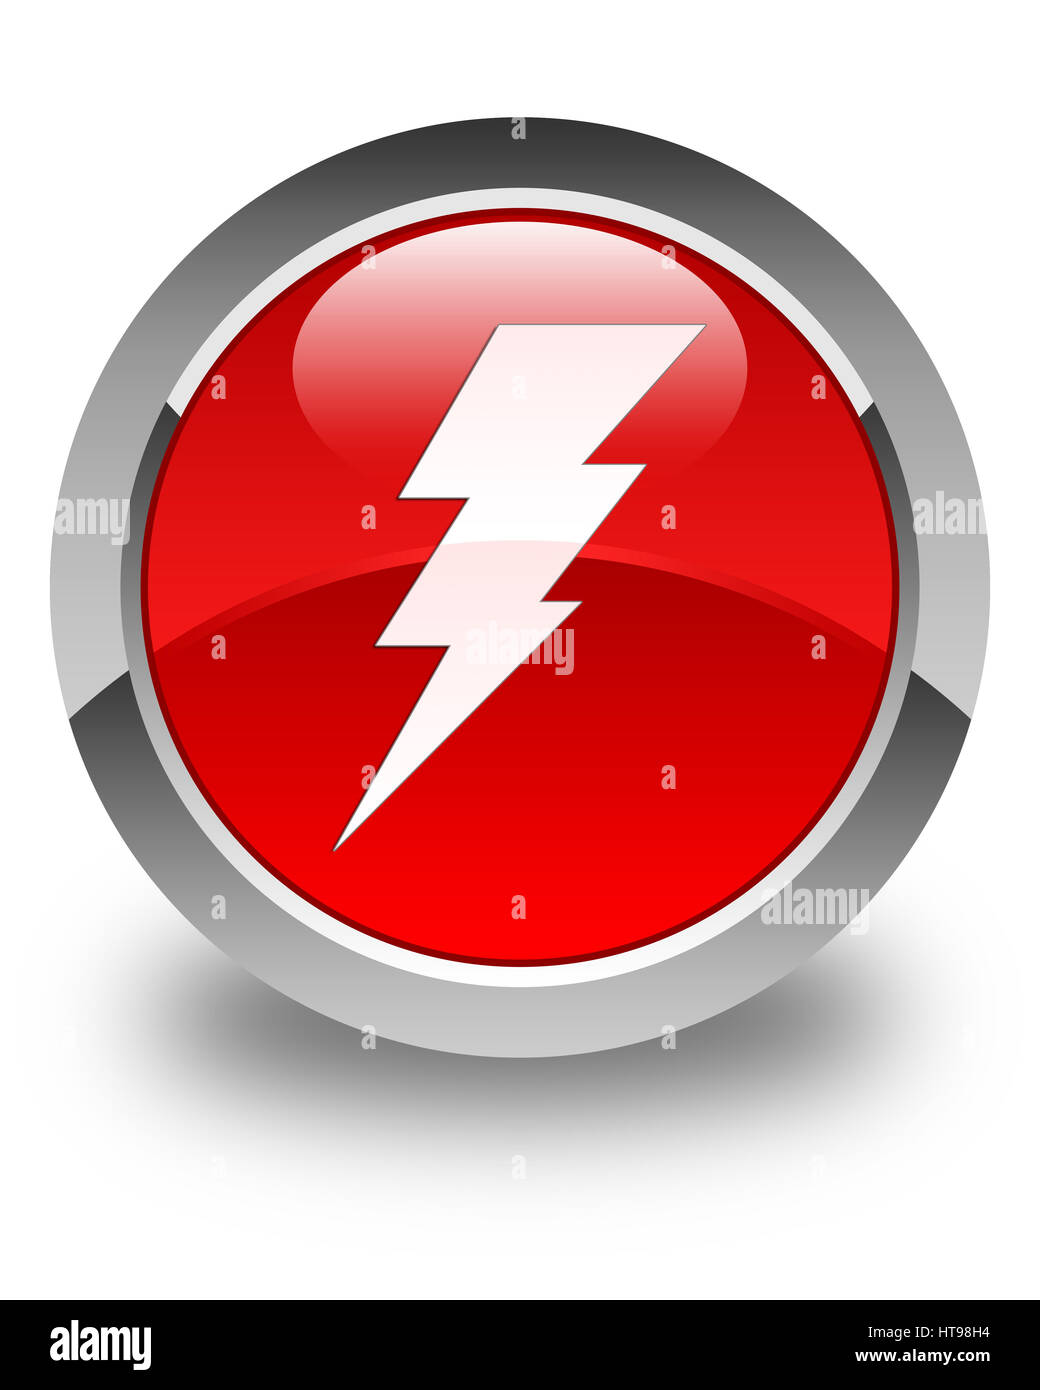 Electricity icon isolated on glossy red round button abstract illustration Stock Photo